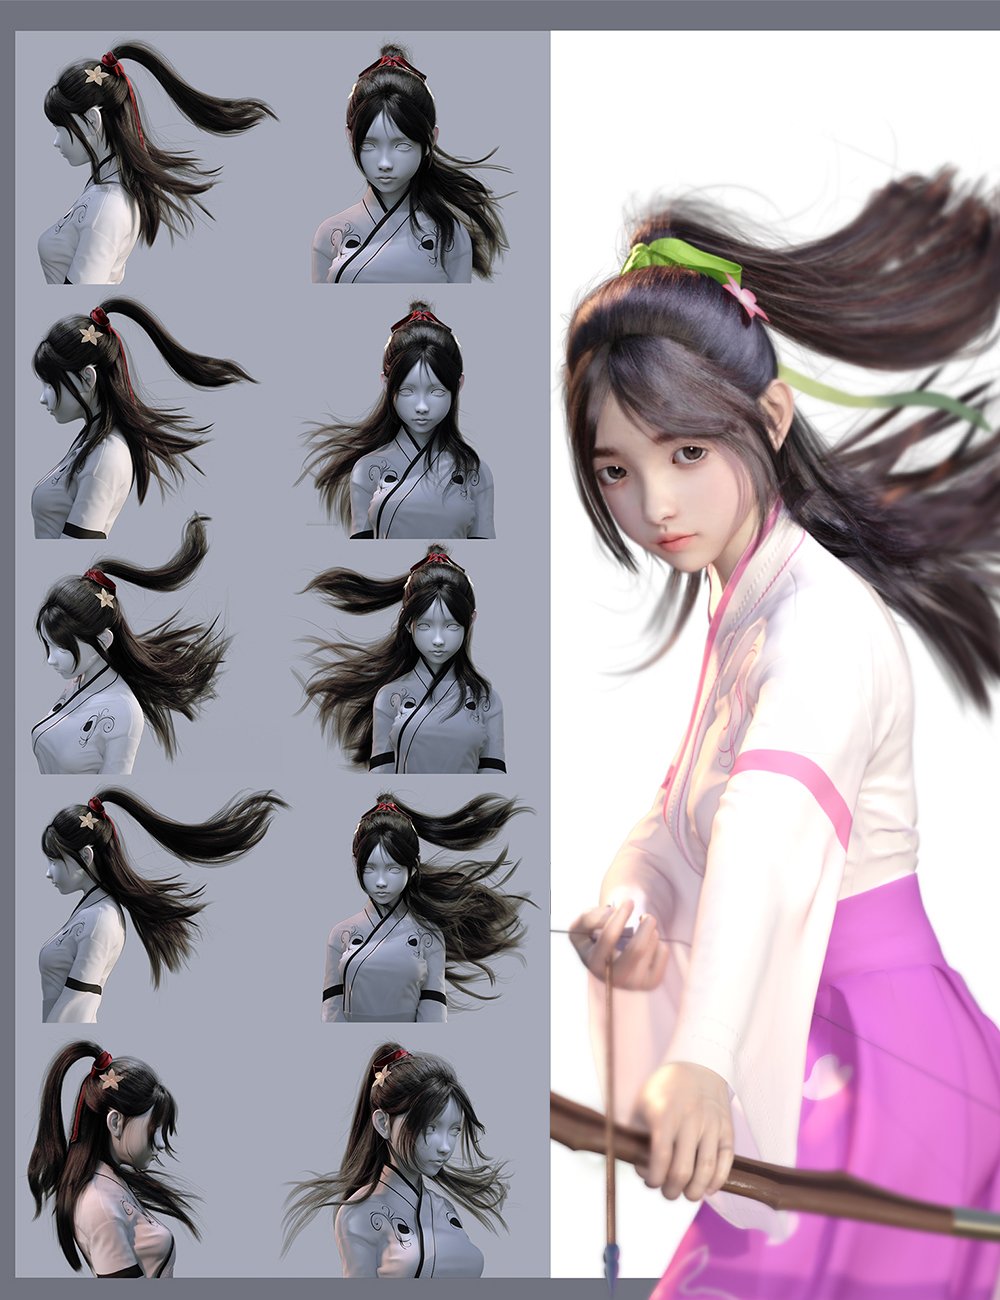 Sue Yee Half Shawl Long Hair for Genesis 8 and 8.1 Females by: Sue Yee, 3D Models by Daz 3D